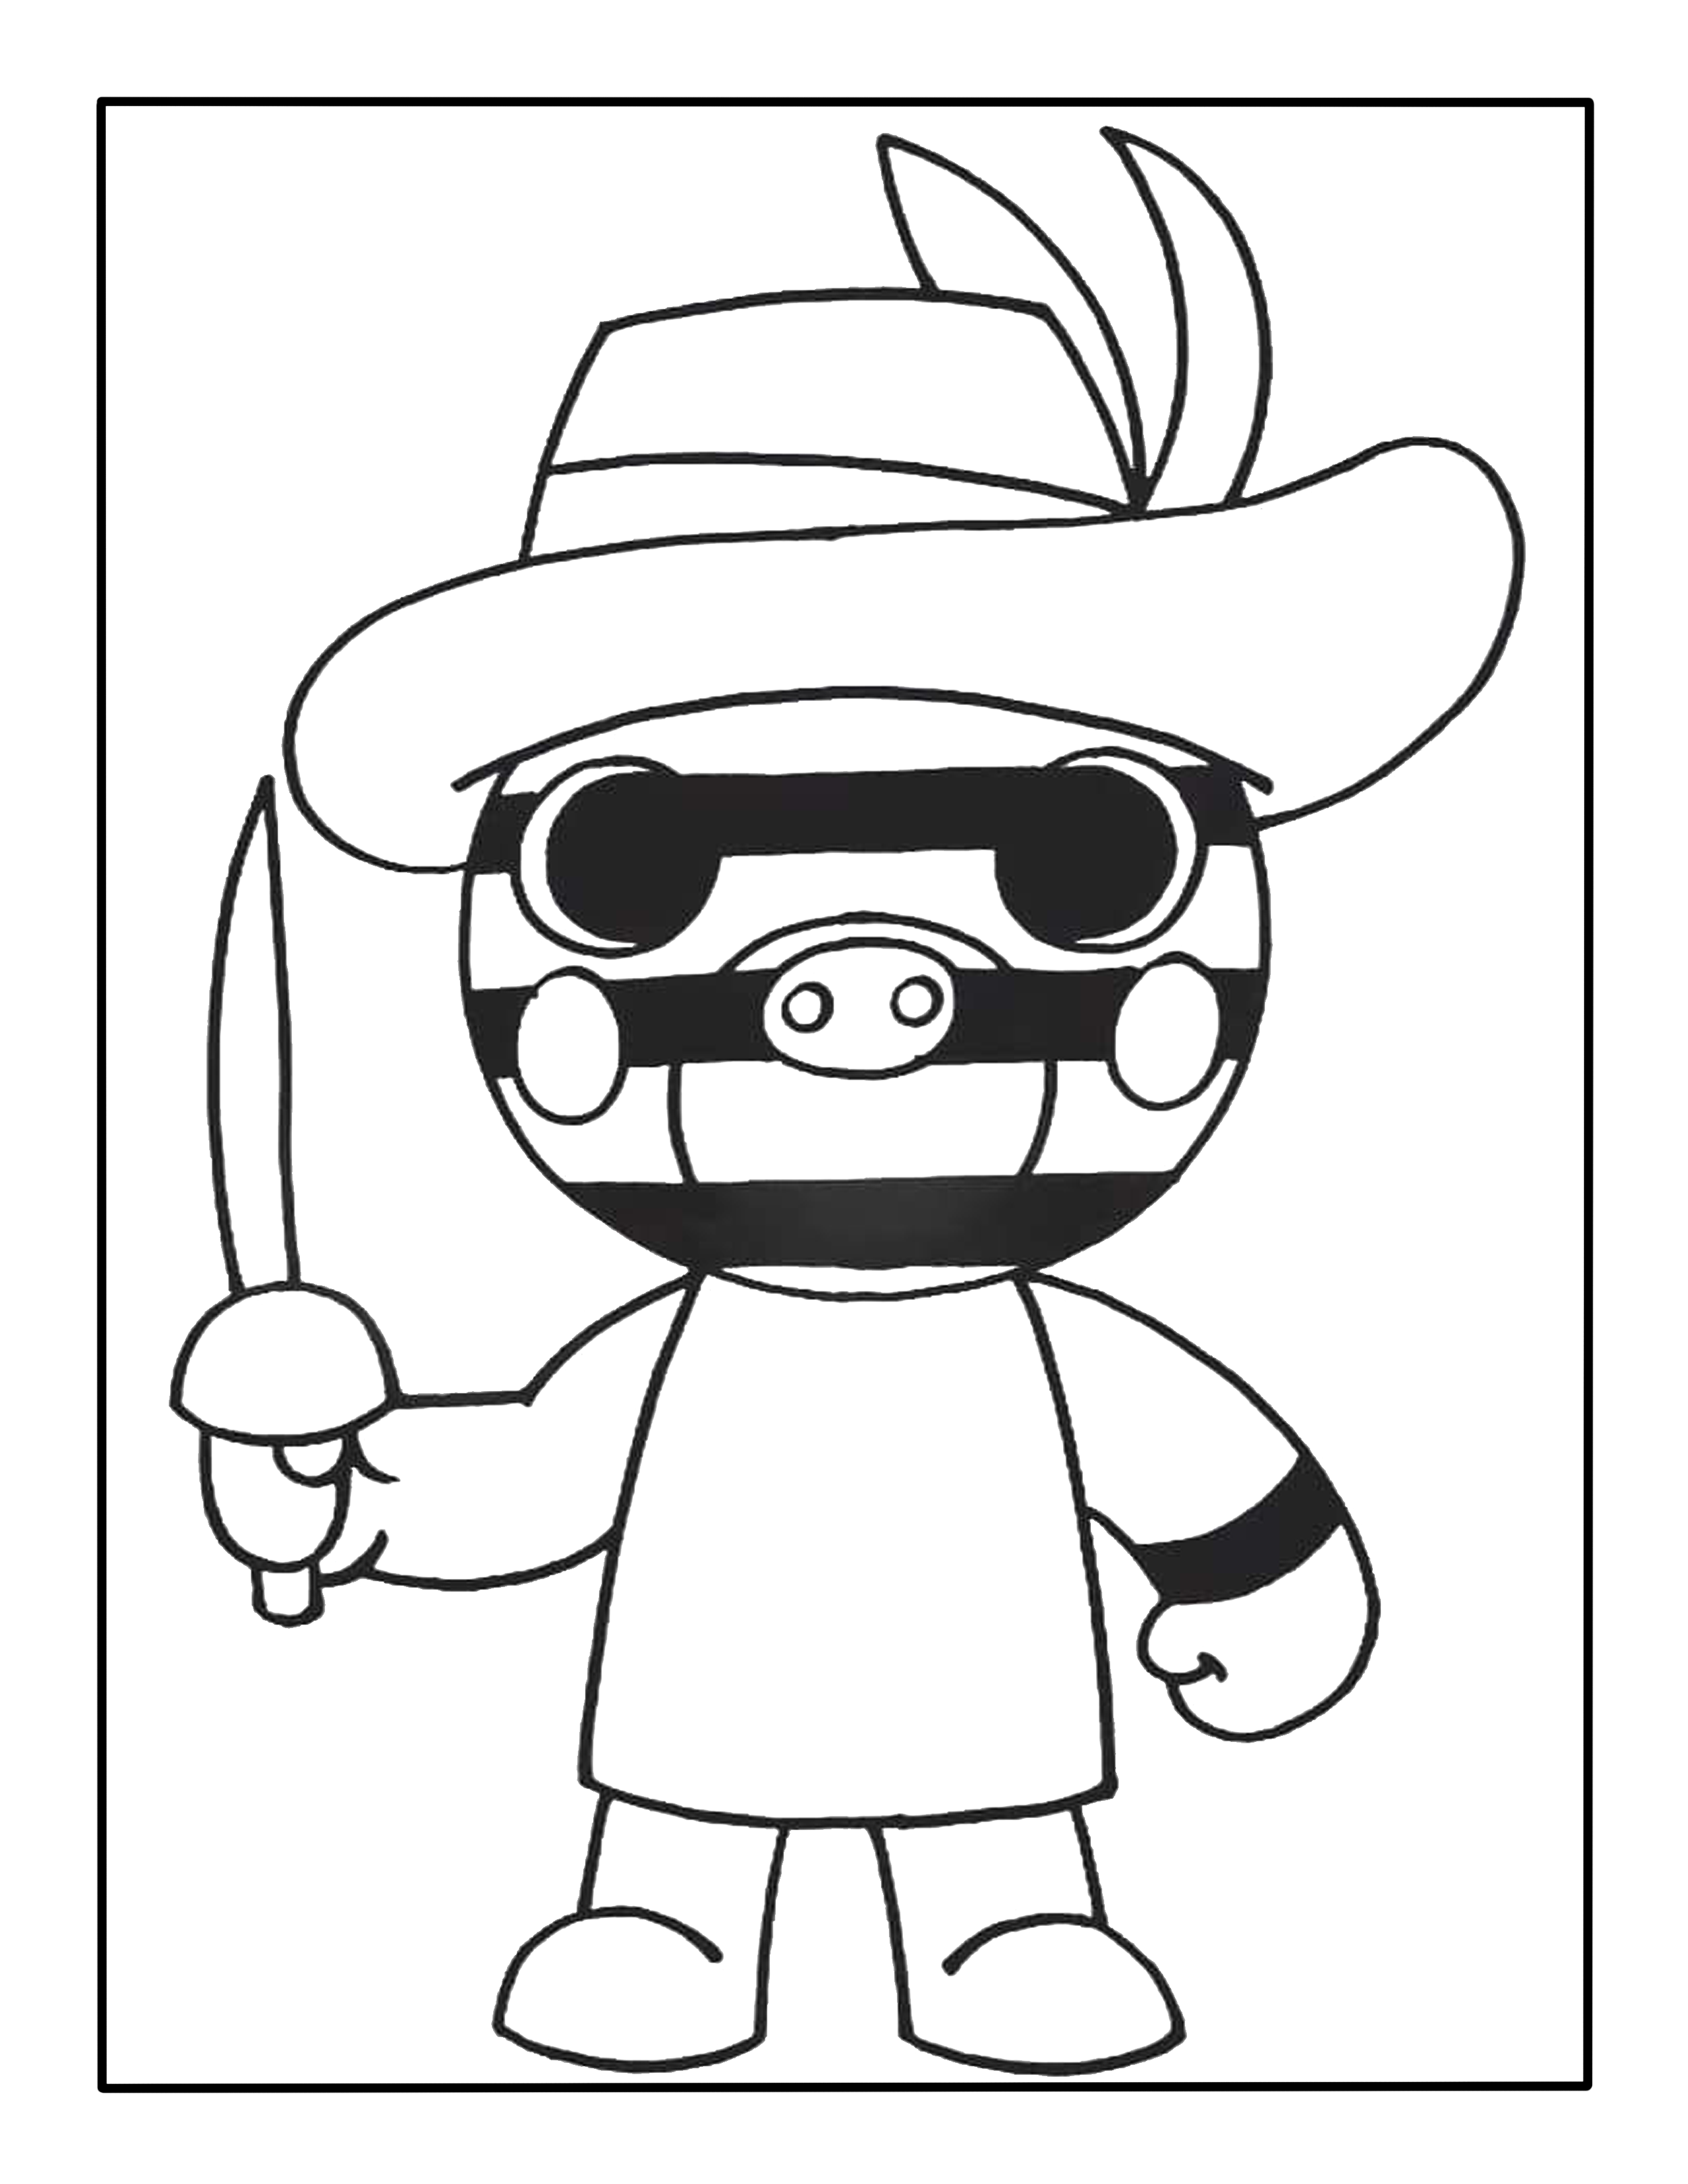 Roblox Coloring Page – Kimmi The Clown